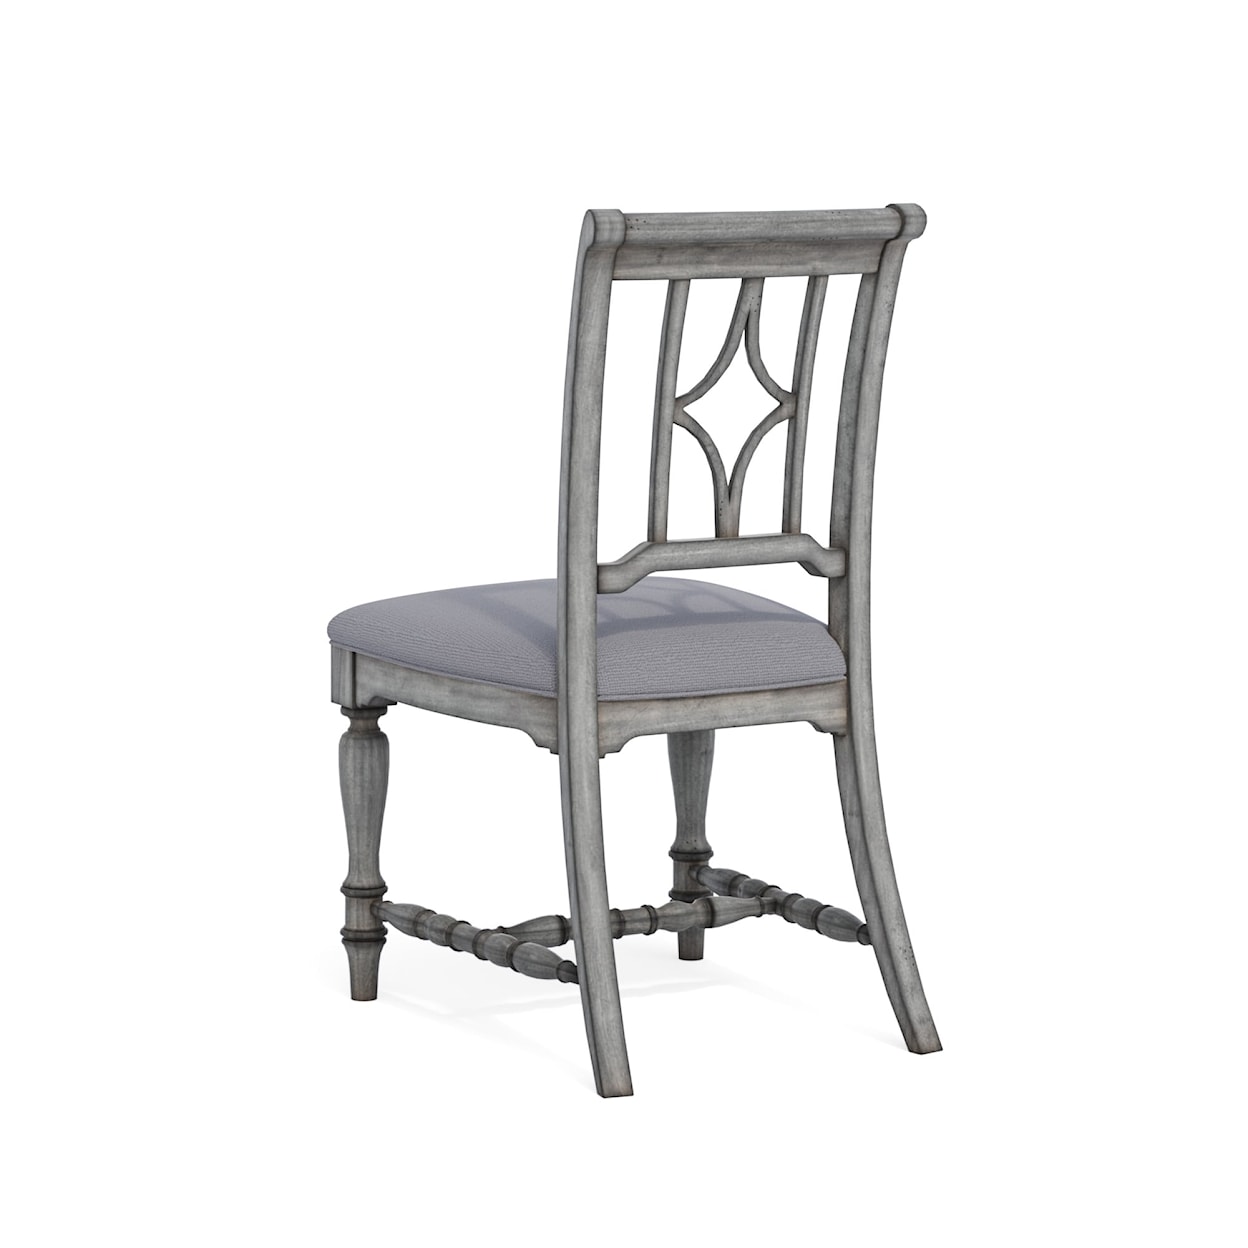 Flexsteel Casegoods Plymouth Dining Side Chair